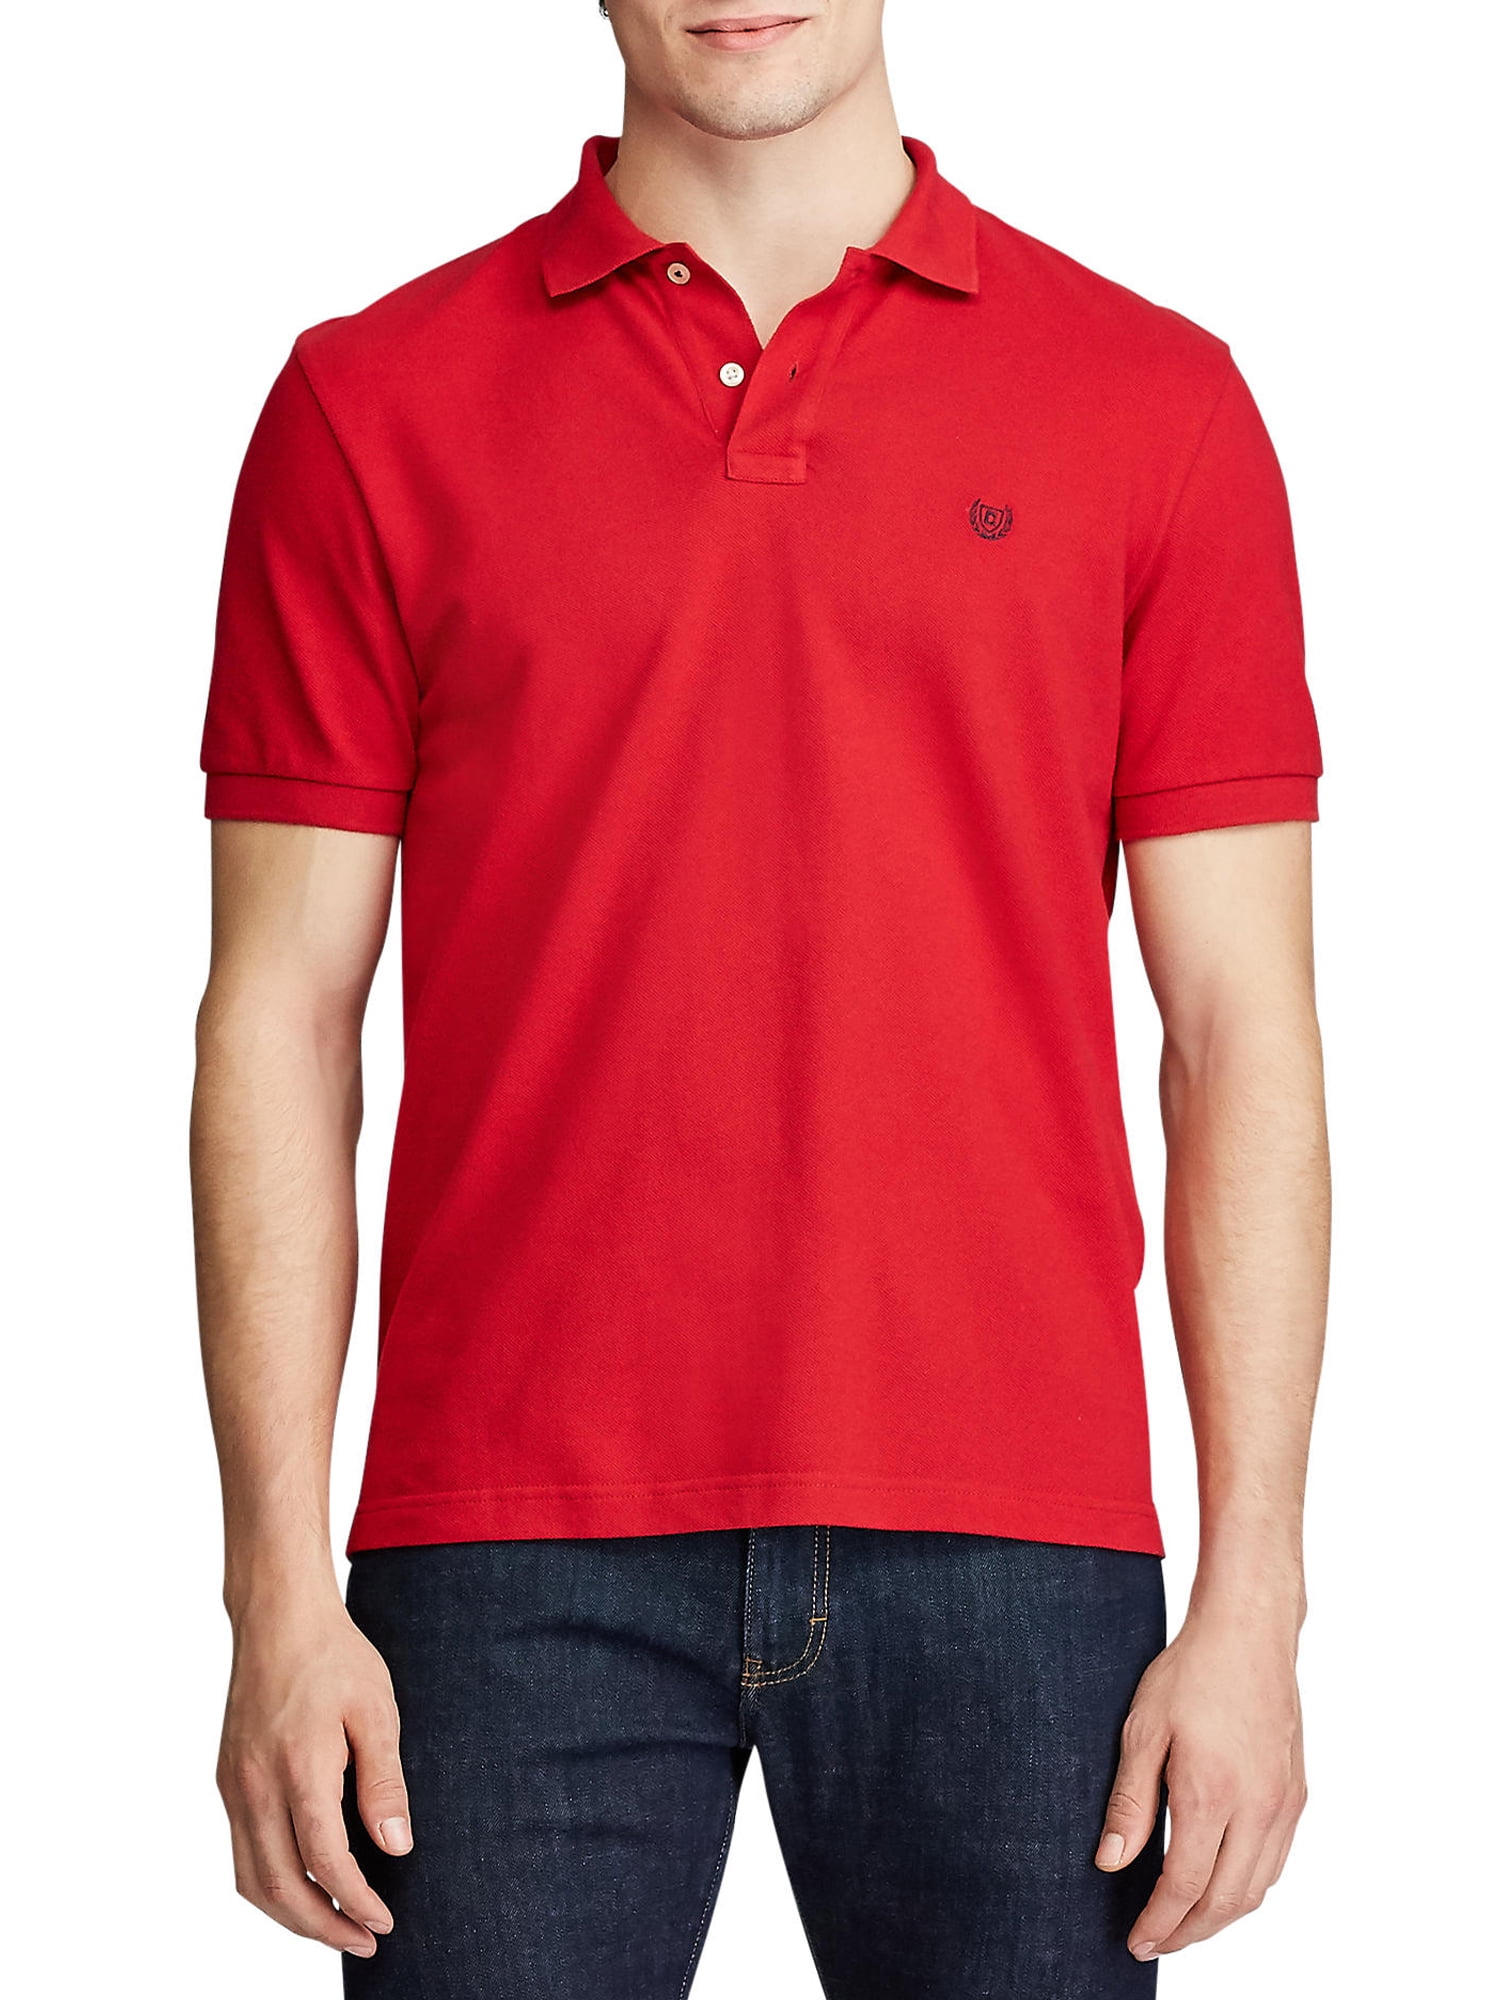 Dicht Dominant Stratford on Avon Chaps Men's Classic Fit Short Sleeve Cotton Everyday Solid Pique Polo Shirt  - Walmart.com